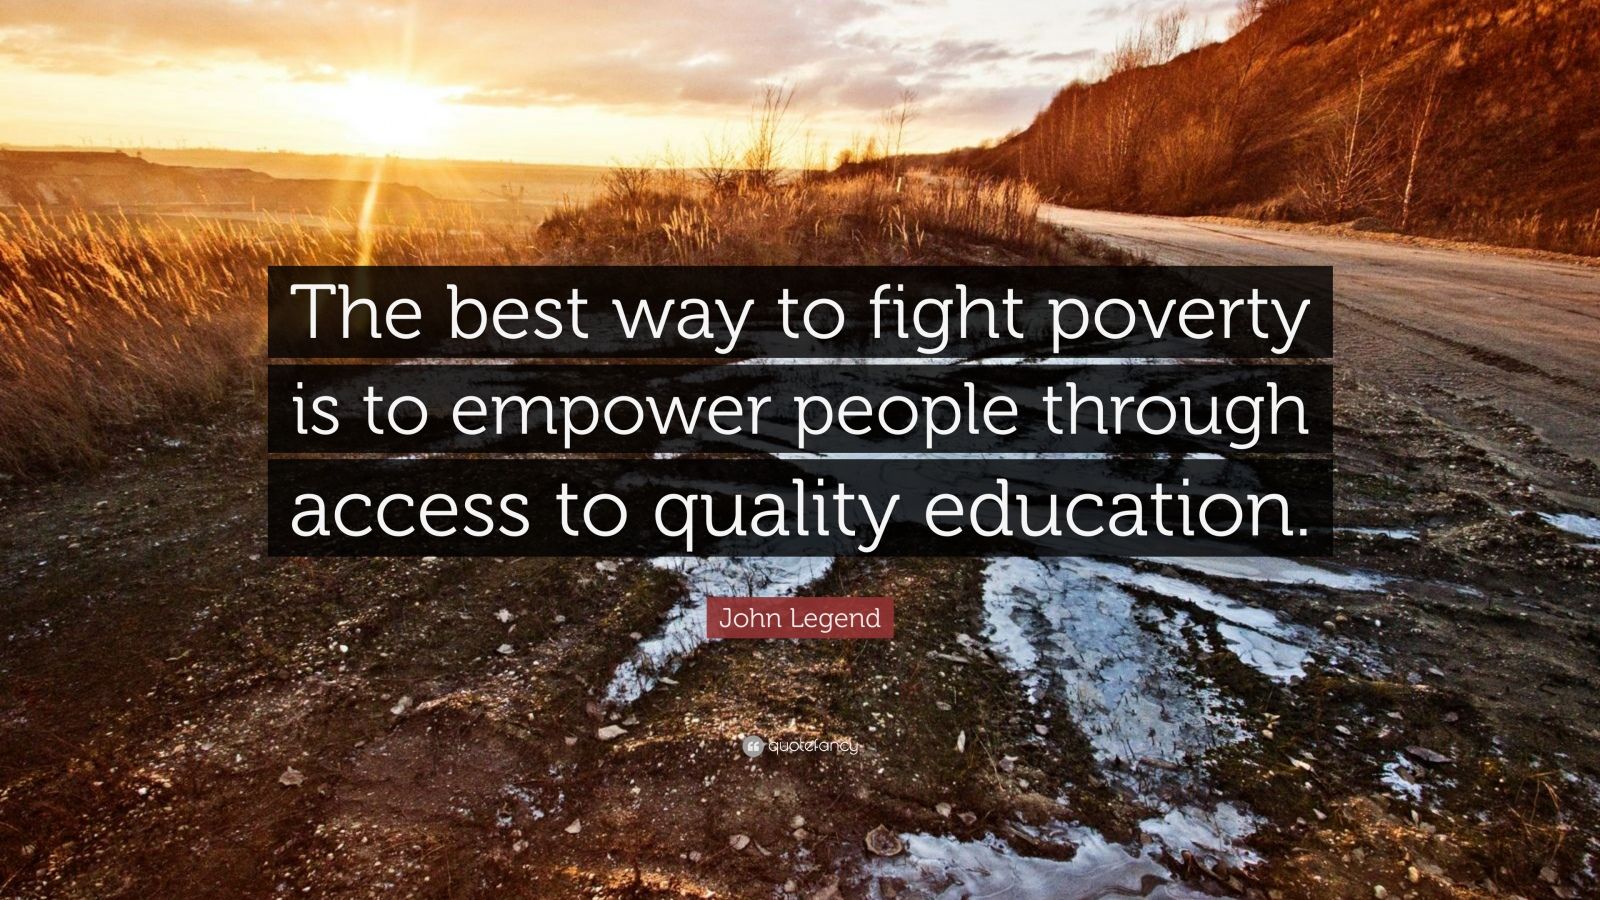 John Legend Quote: “The best way to fight poverty is to empower people